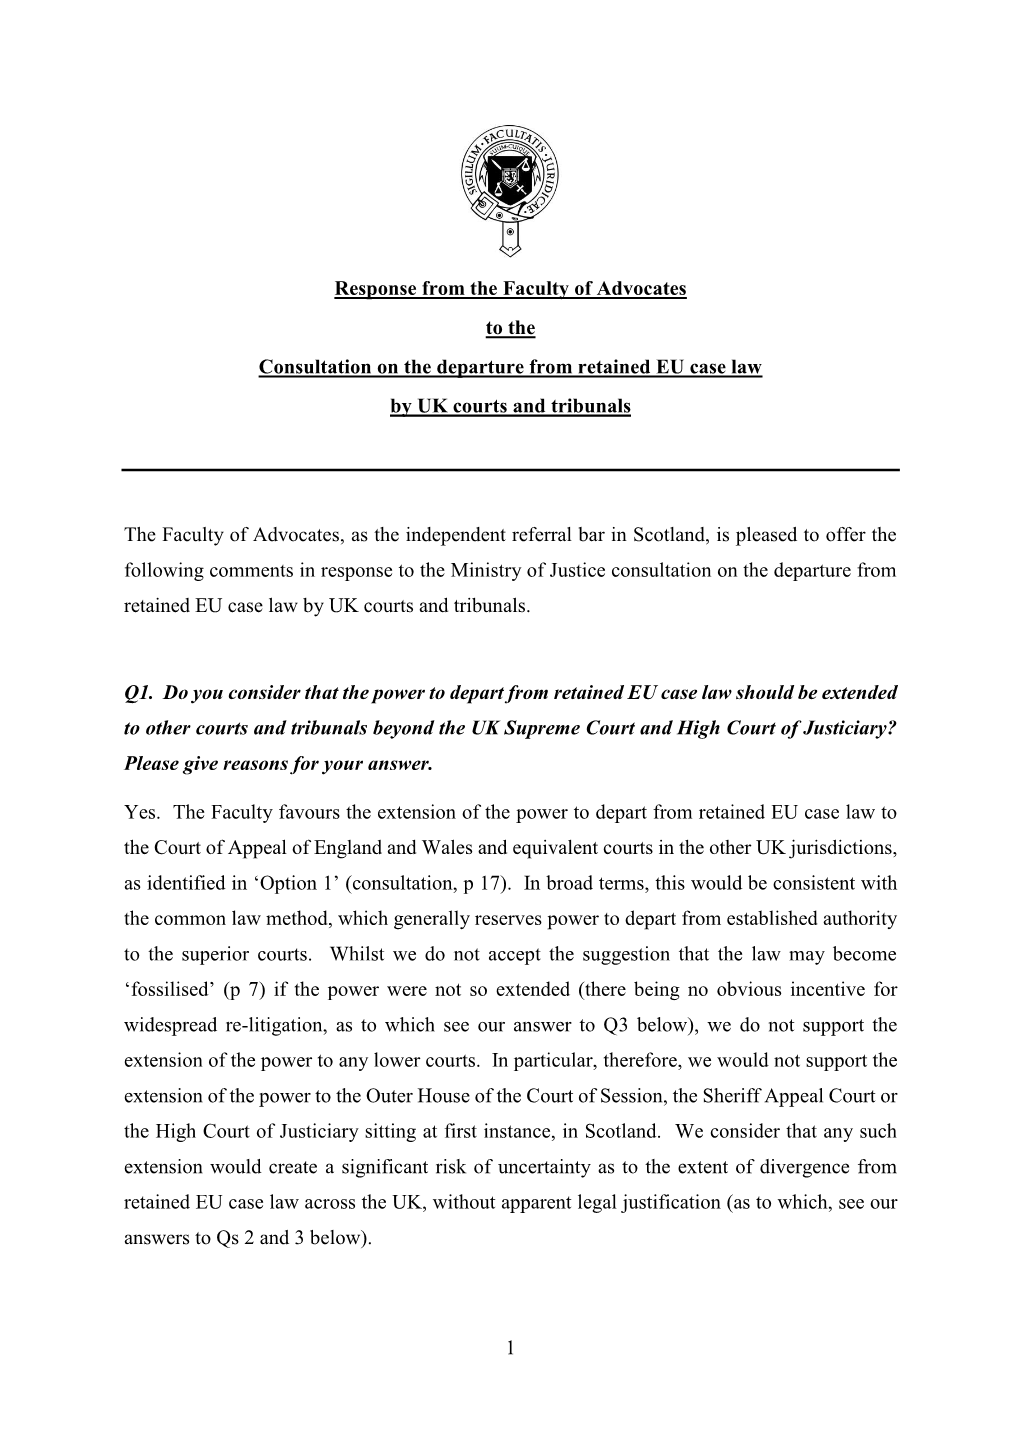 Departure from Retained EU Case Law by UK Courts and Tribunals